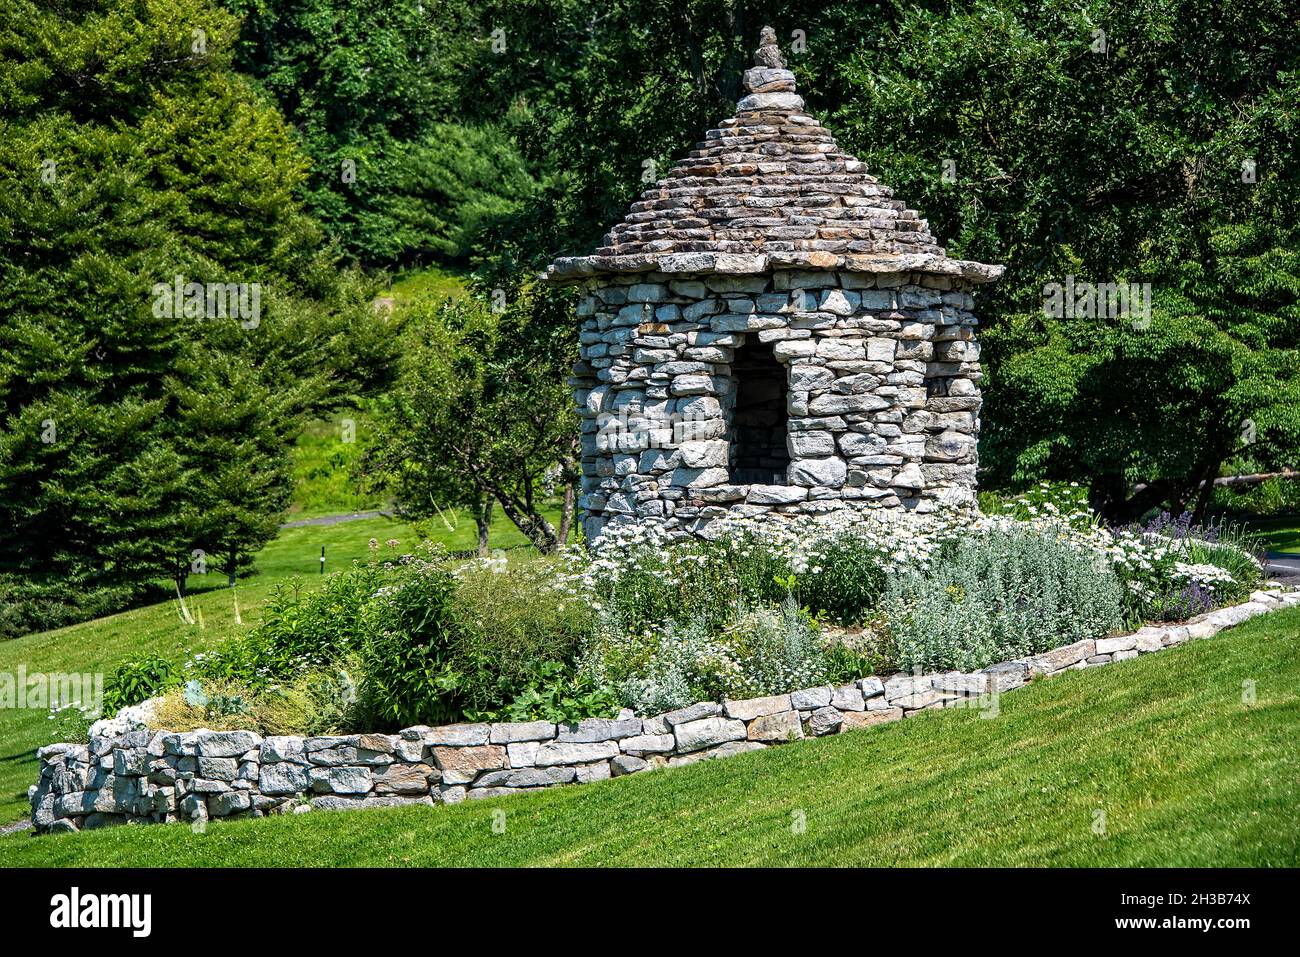 Small stone structured gazebo with flower garden and stone wall, on the grounds at Mohonk Mountain House in upstate New York. Stock Photo